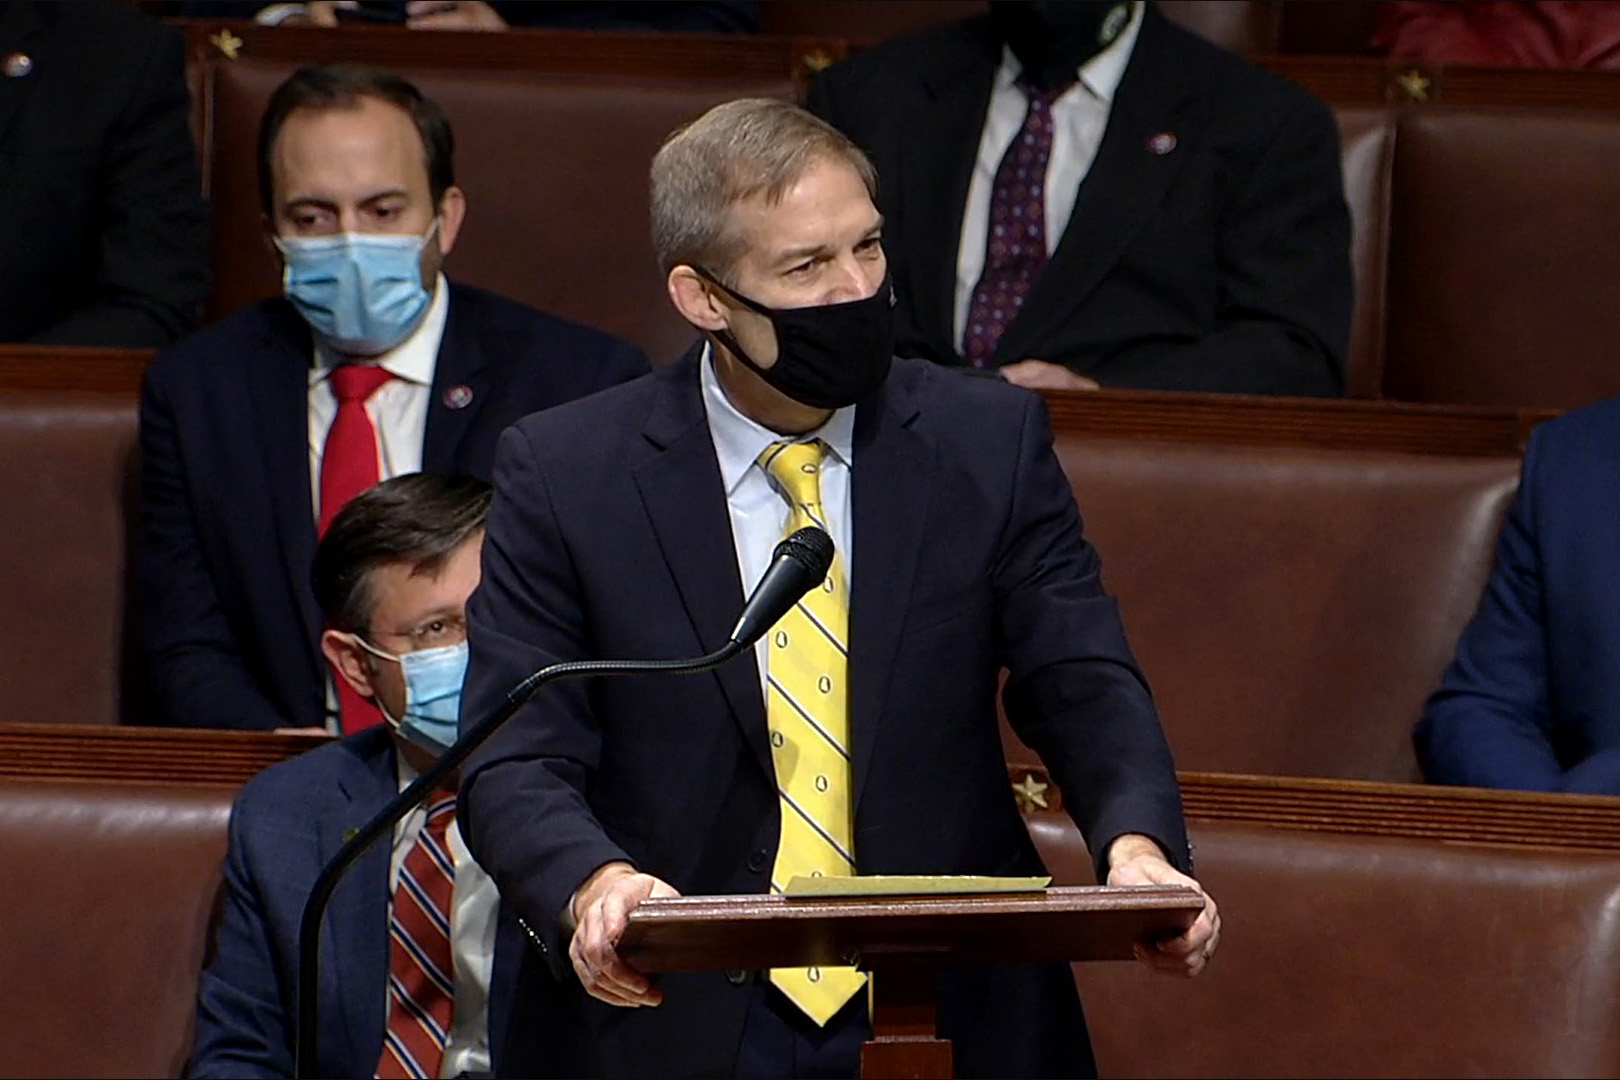 PHOTO: Republican Rep. Jim Jordan speaks during a House debate session called to ratify the 2020 presidential election at the U.S. Capitol on Jan. 6, 2021 in Washington.